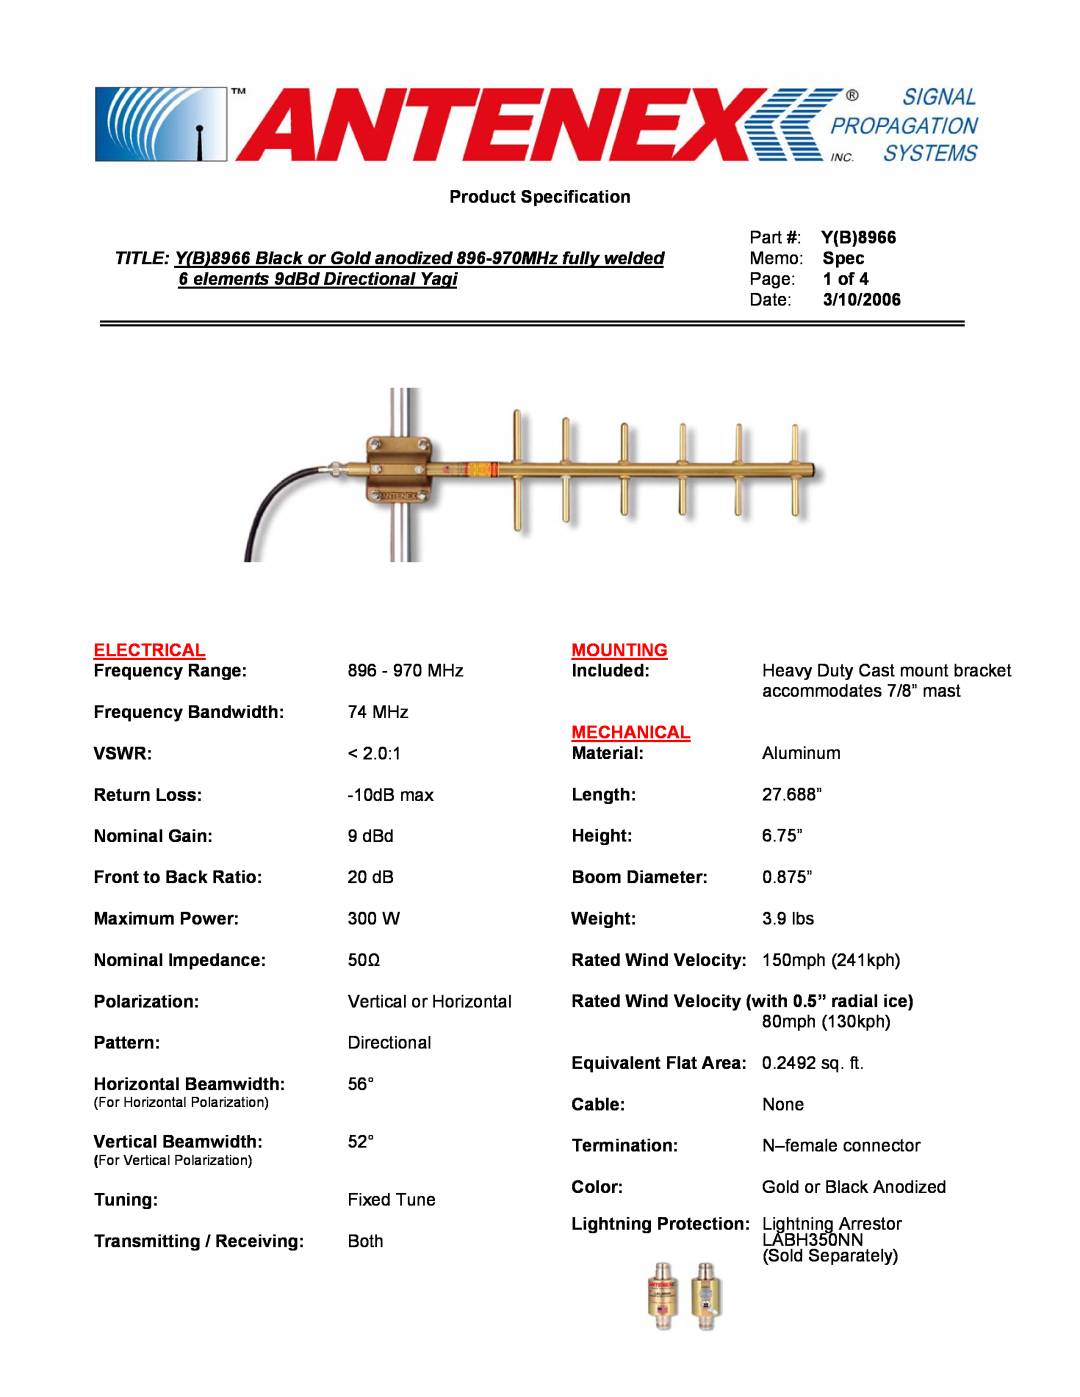 B&B Electronics Y(B)8966 manual elements 9dBd Directional Yagi, Product Specification, Electrical, Mounting, Mechanical 